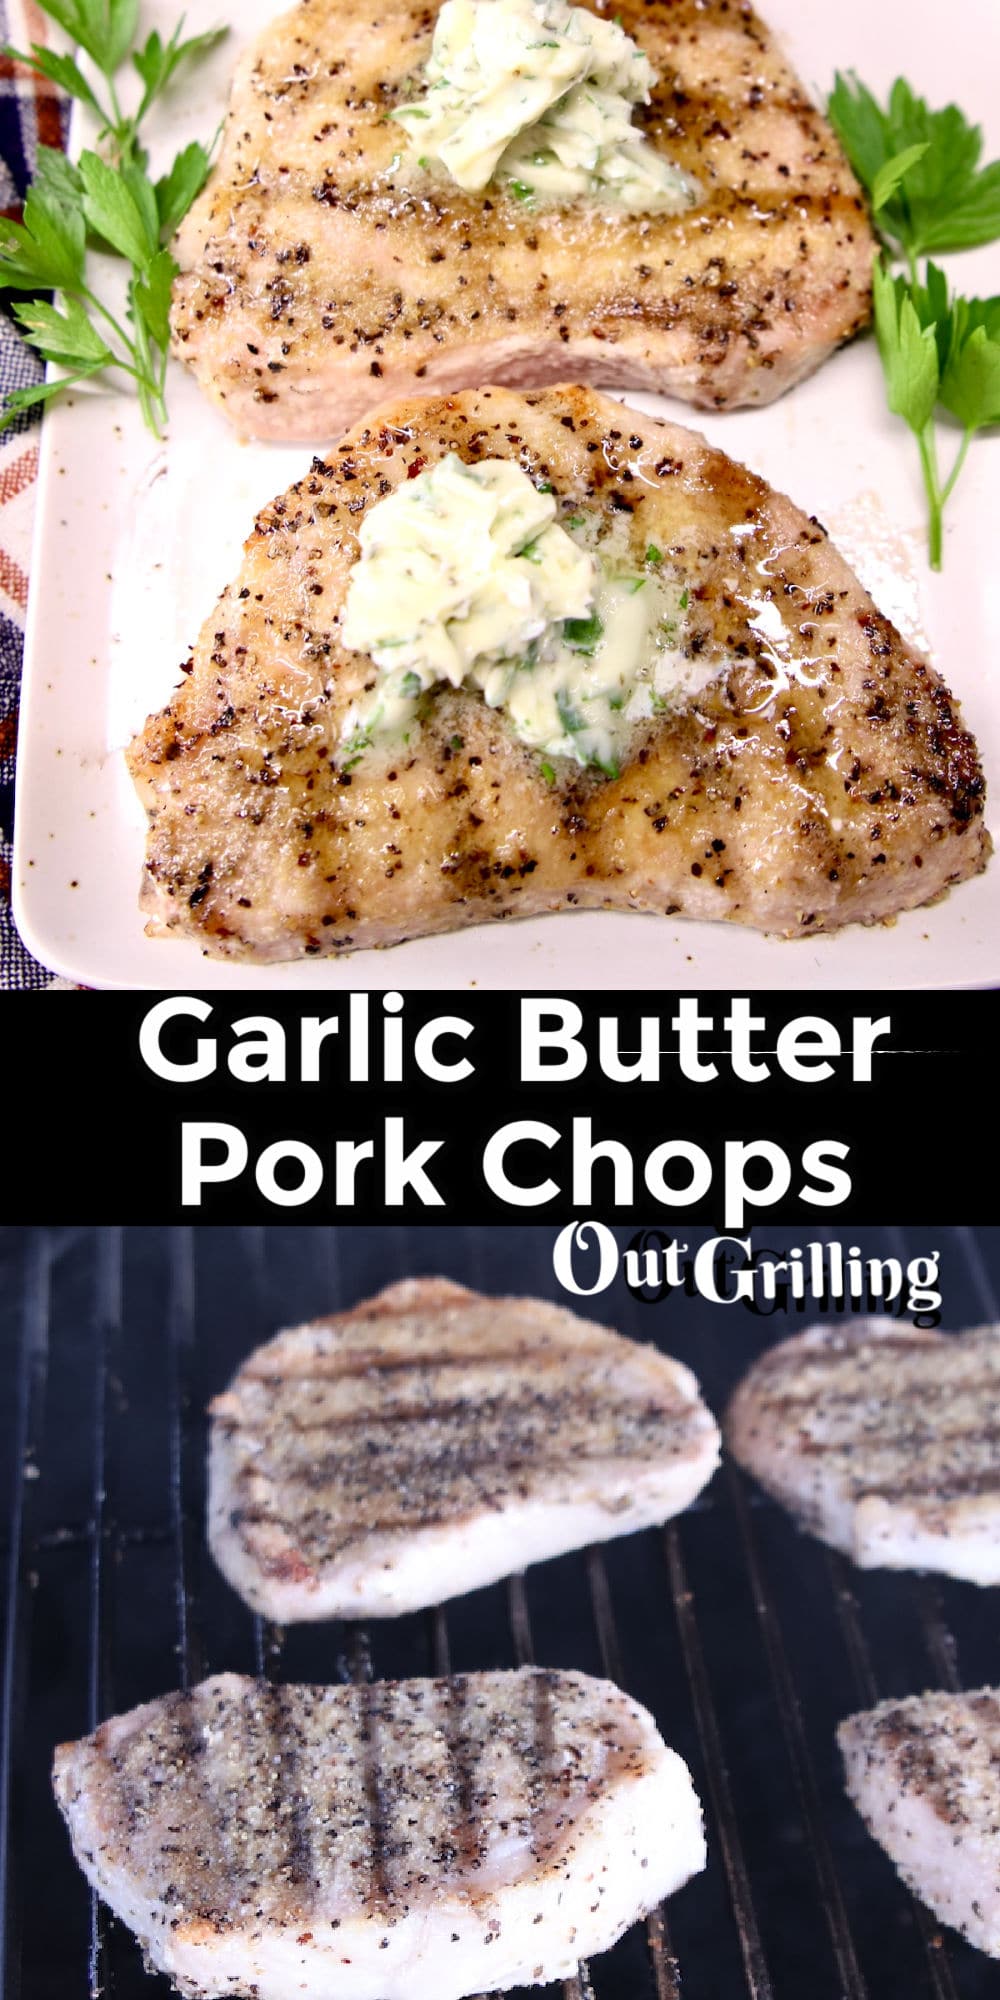 Grilled Garlic Butter Pork Chops Recipe - Out Grilling